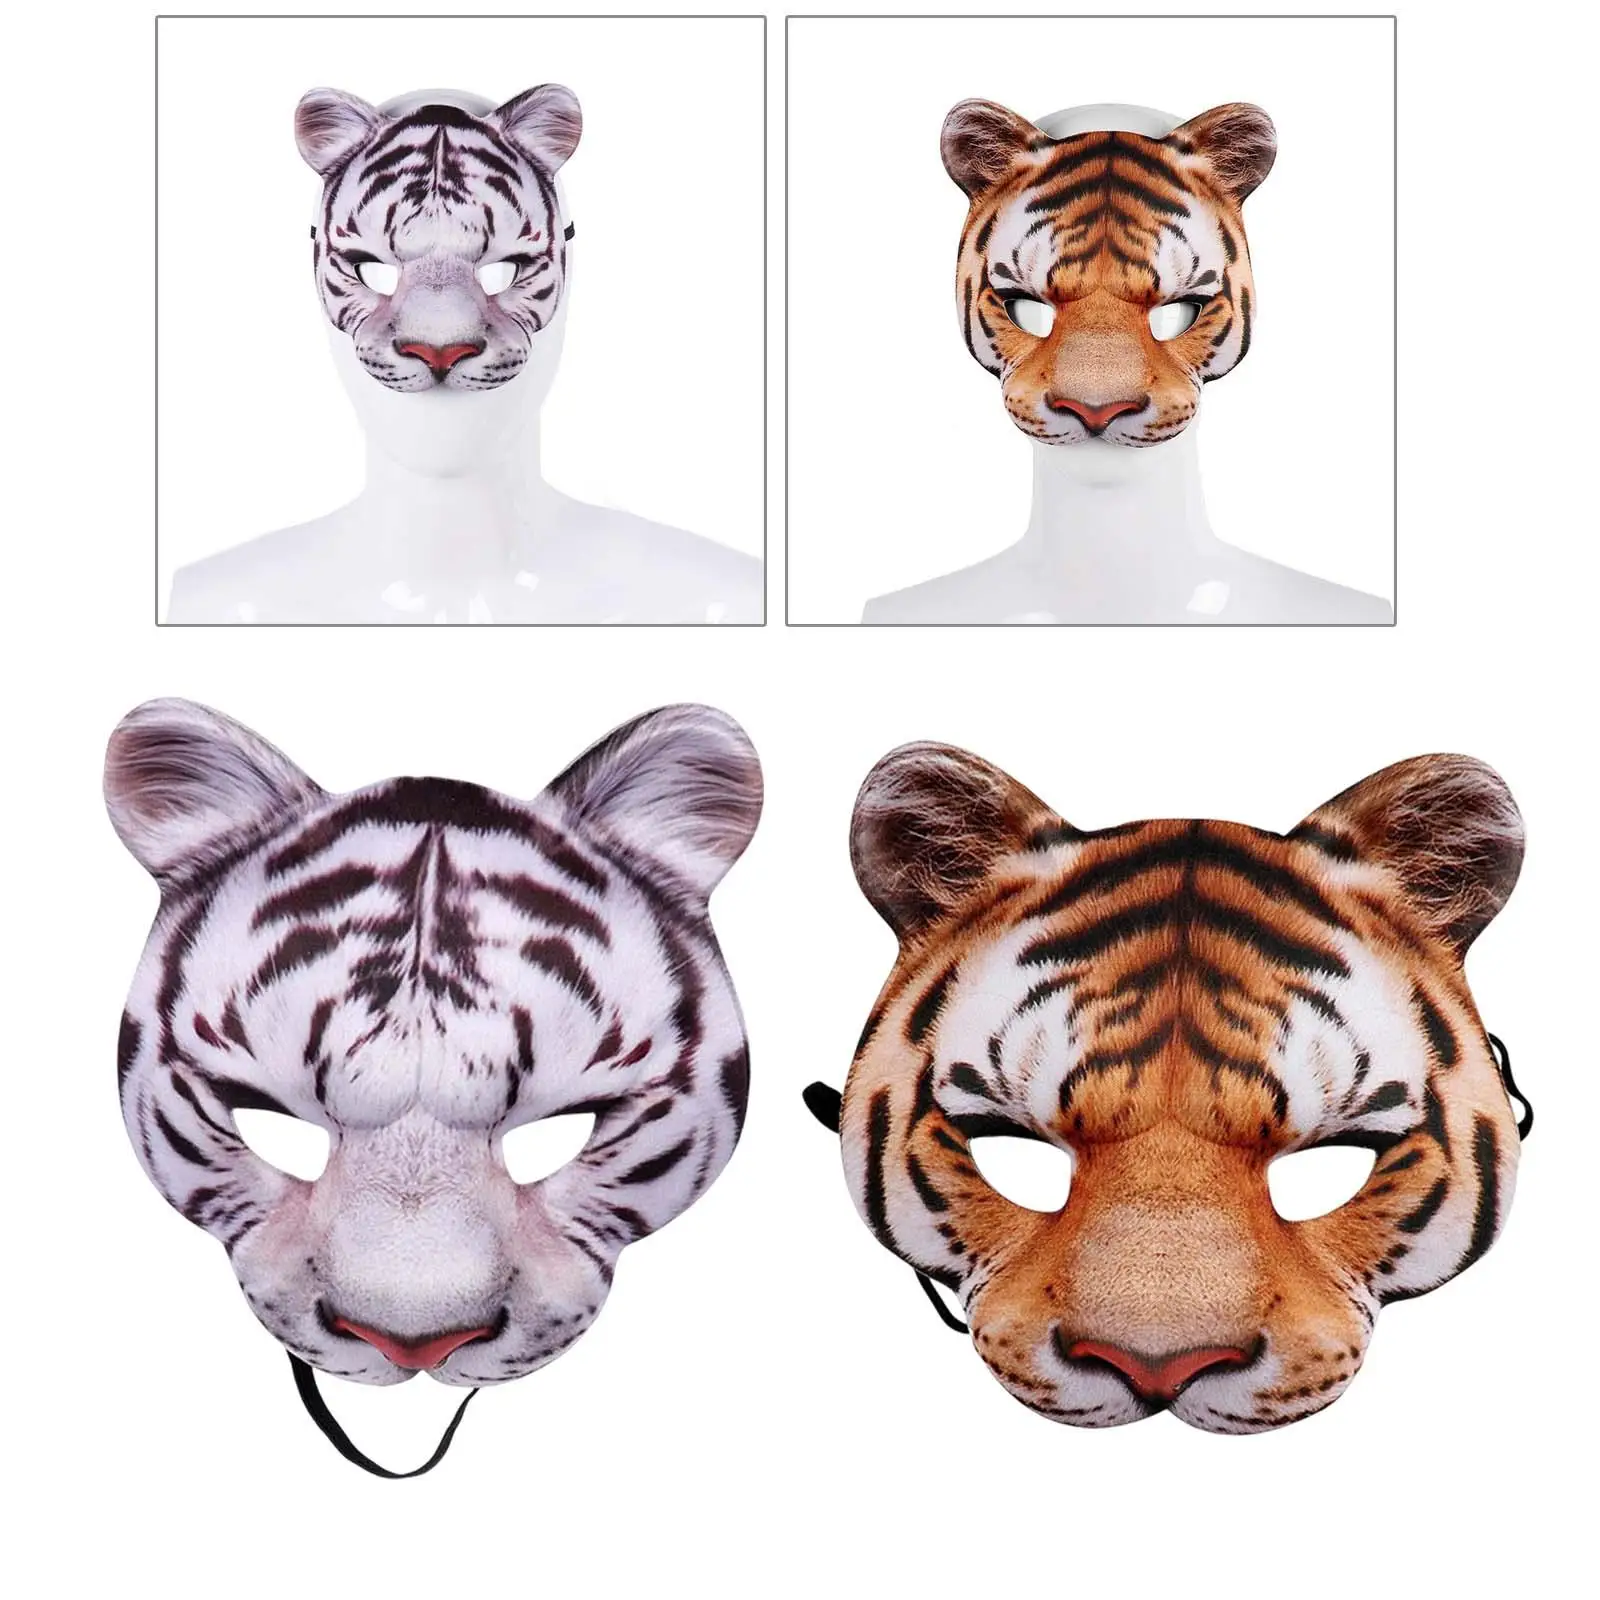 Novelty Woman Tiger Mask Half Face Cosplay Props Decoration Party Supplies for Halloween Animal Cosplay Holiday Masquerade Adult